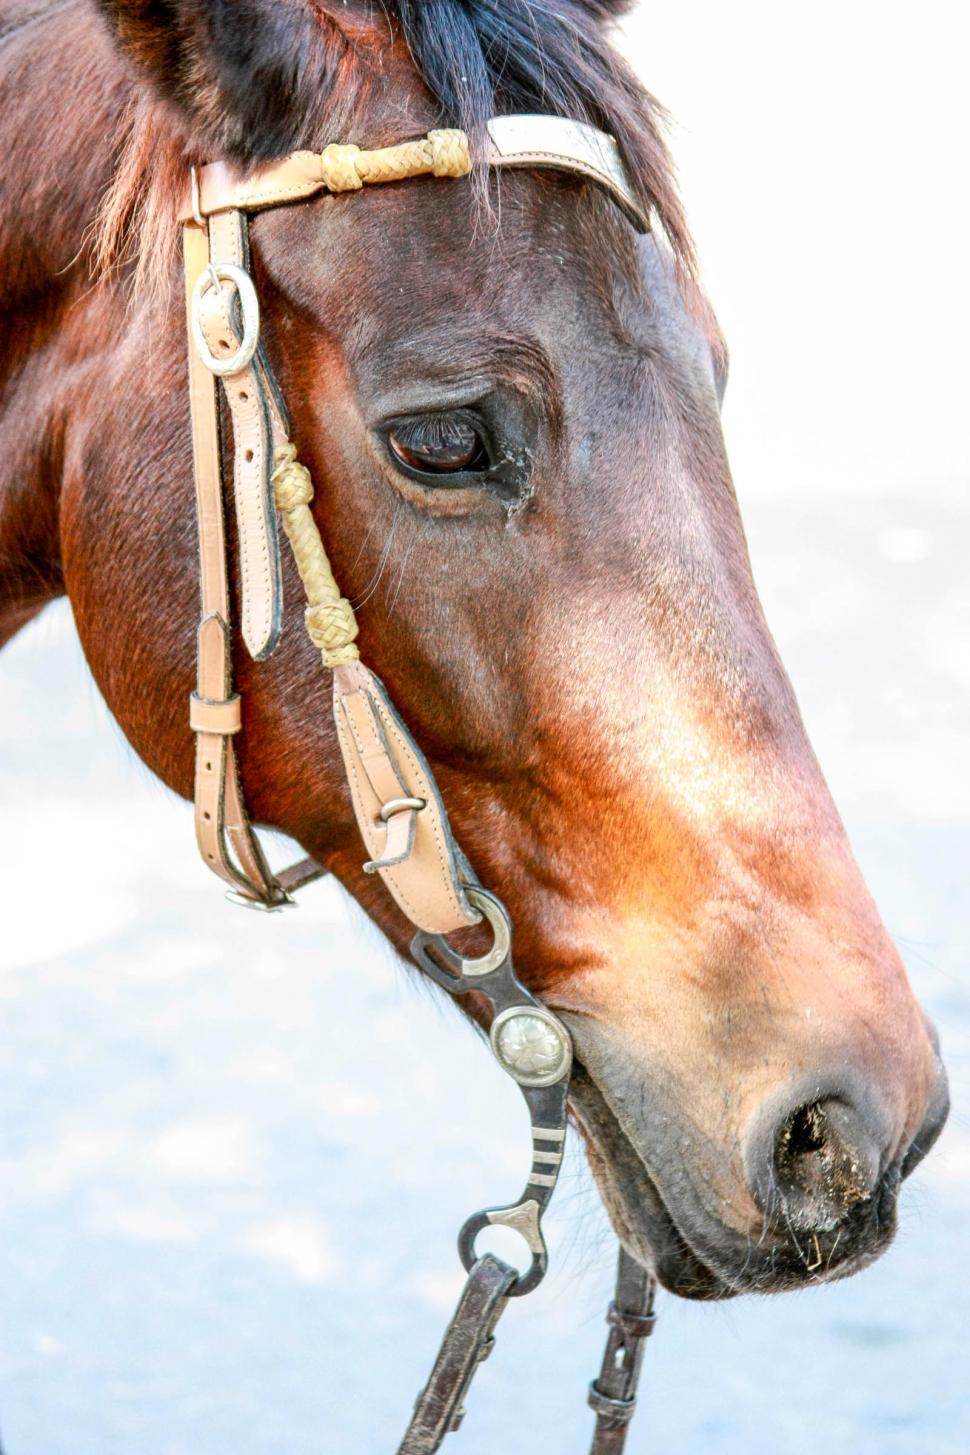 Free Image of Horse Face 